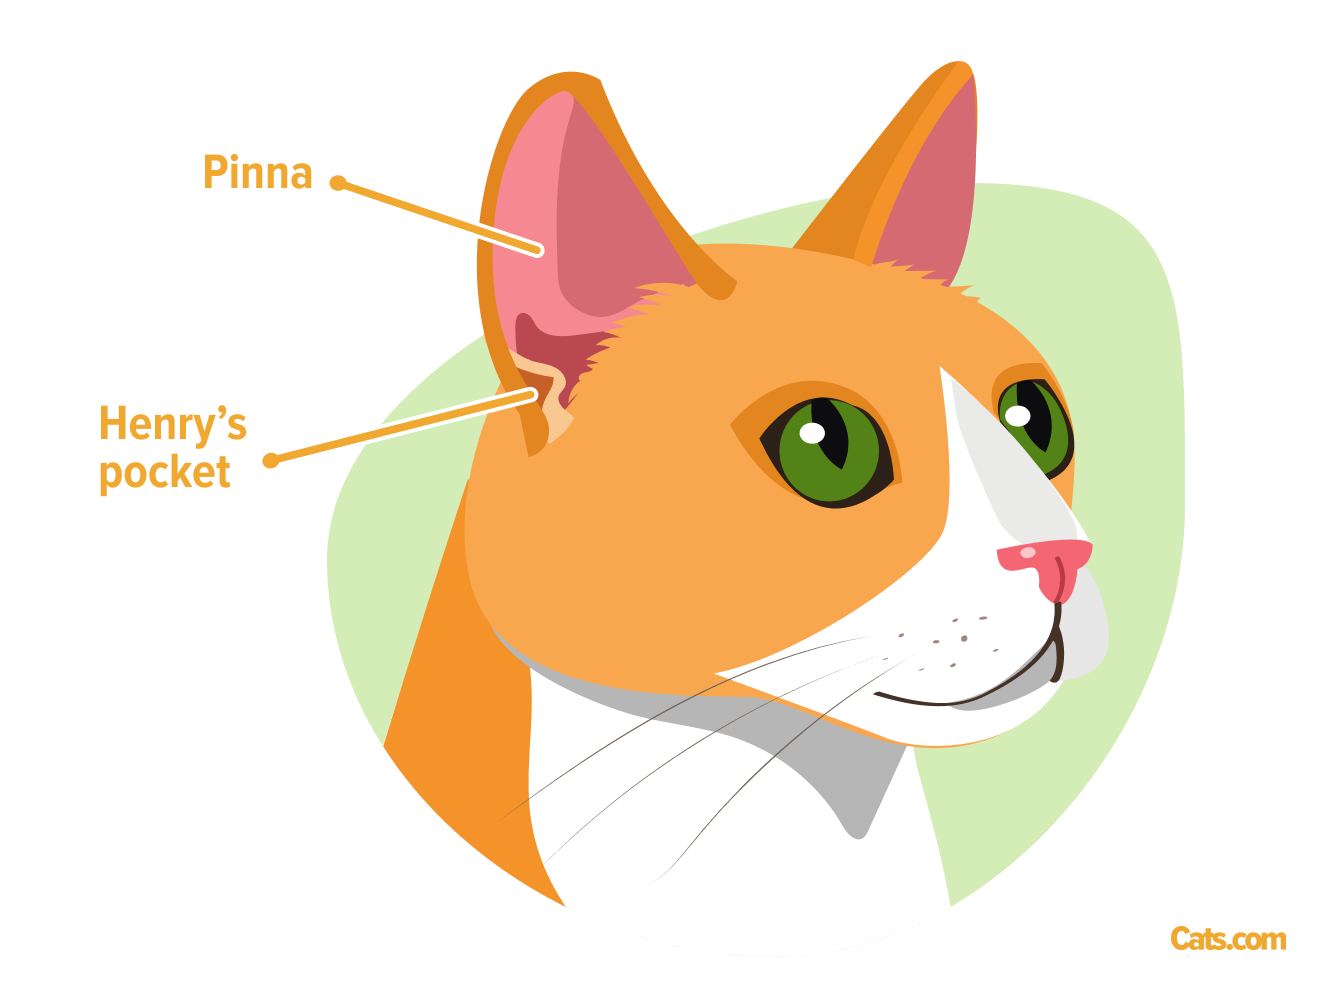 Cats have a distinctive feature on their ears called the Henry's pocket.